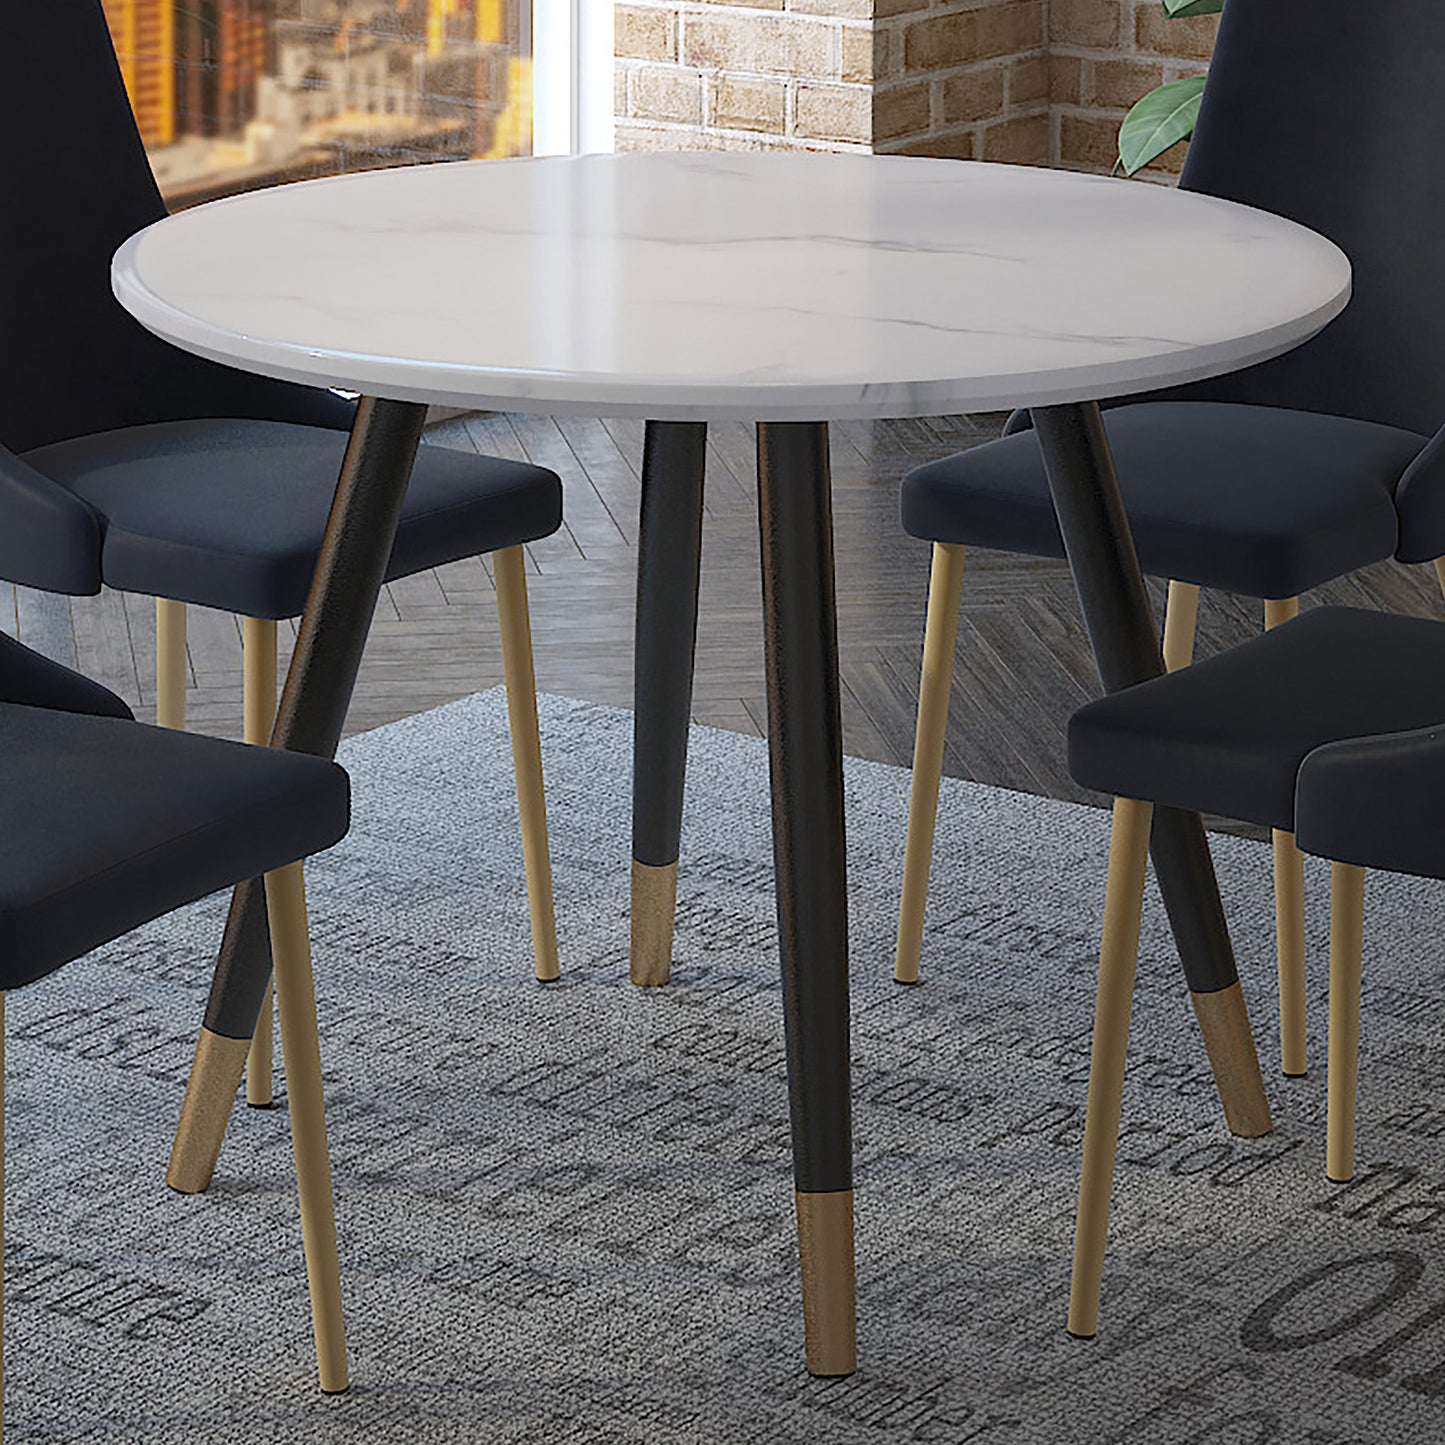 Emery Round Dining Table in White and Black